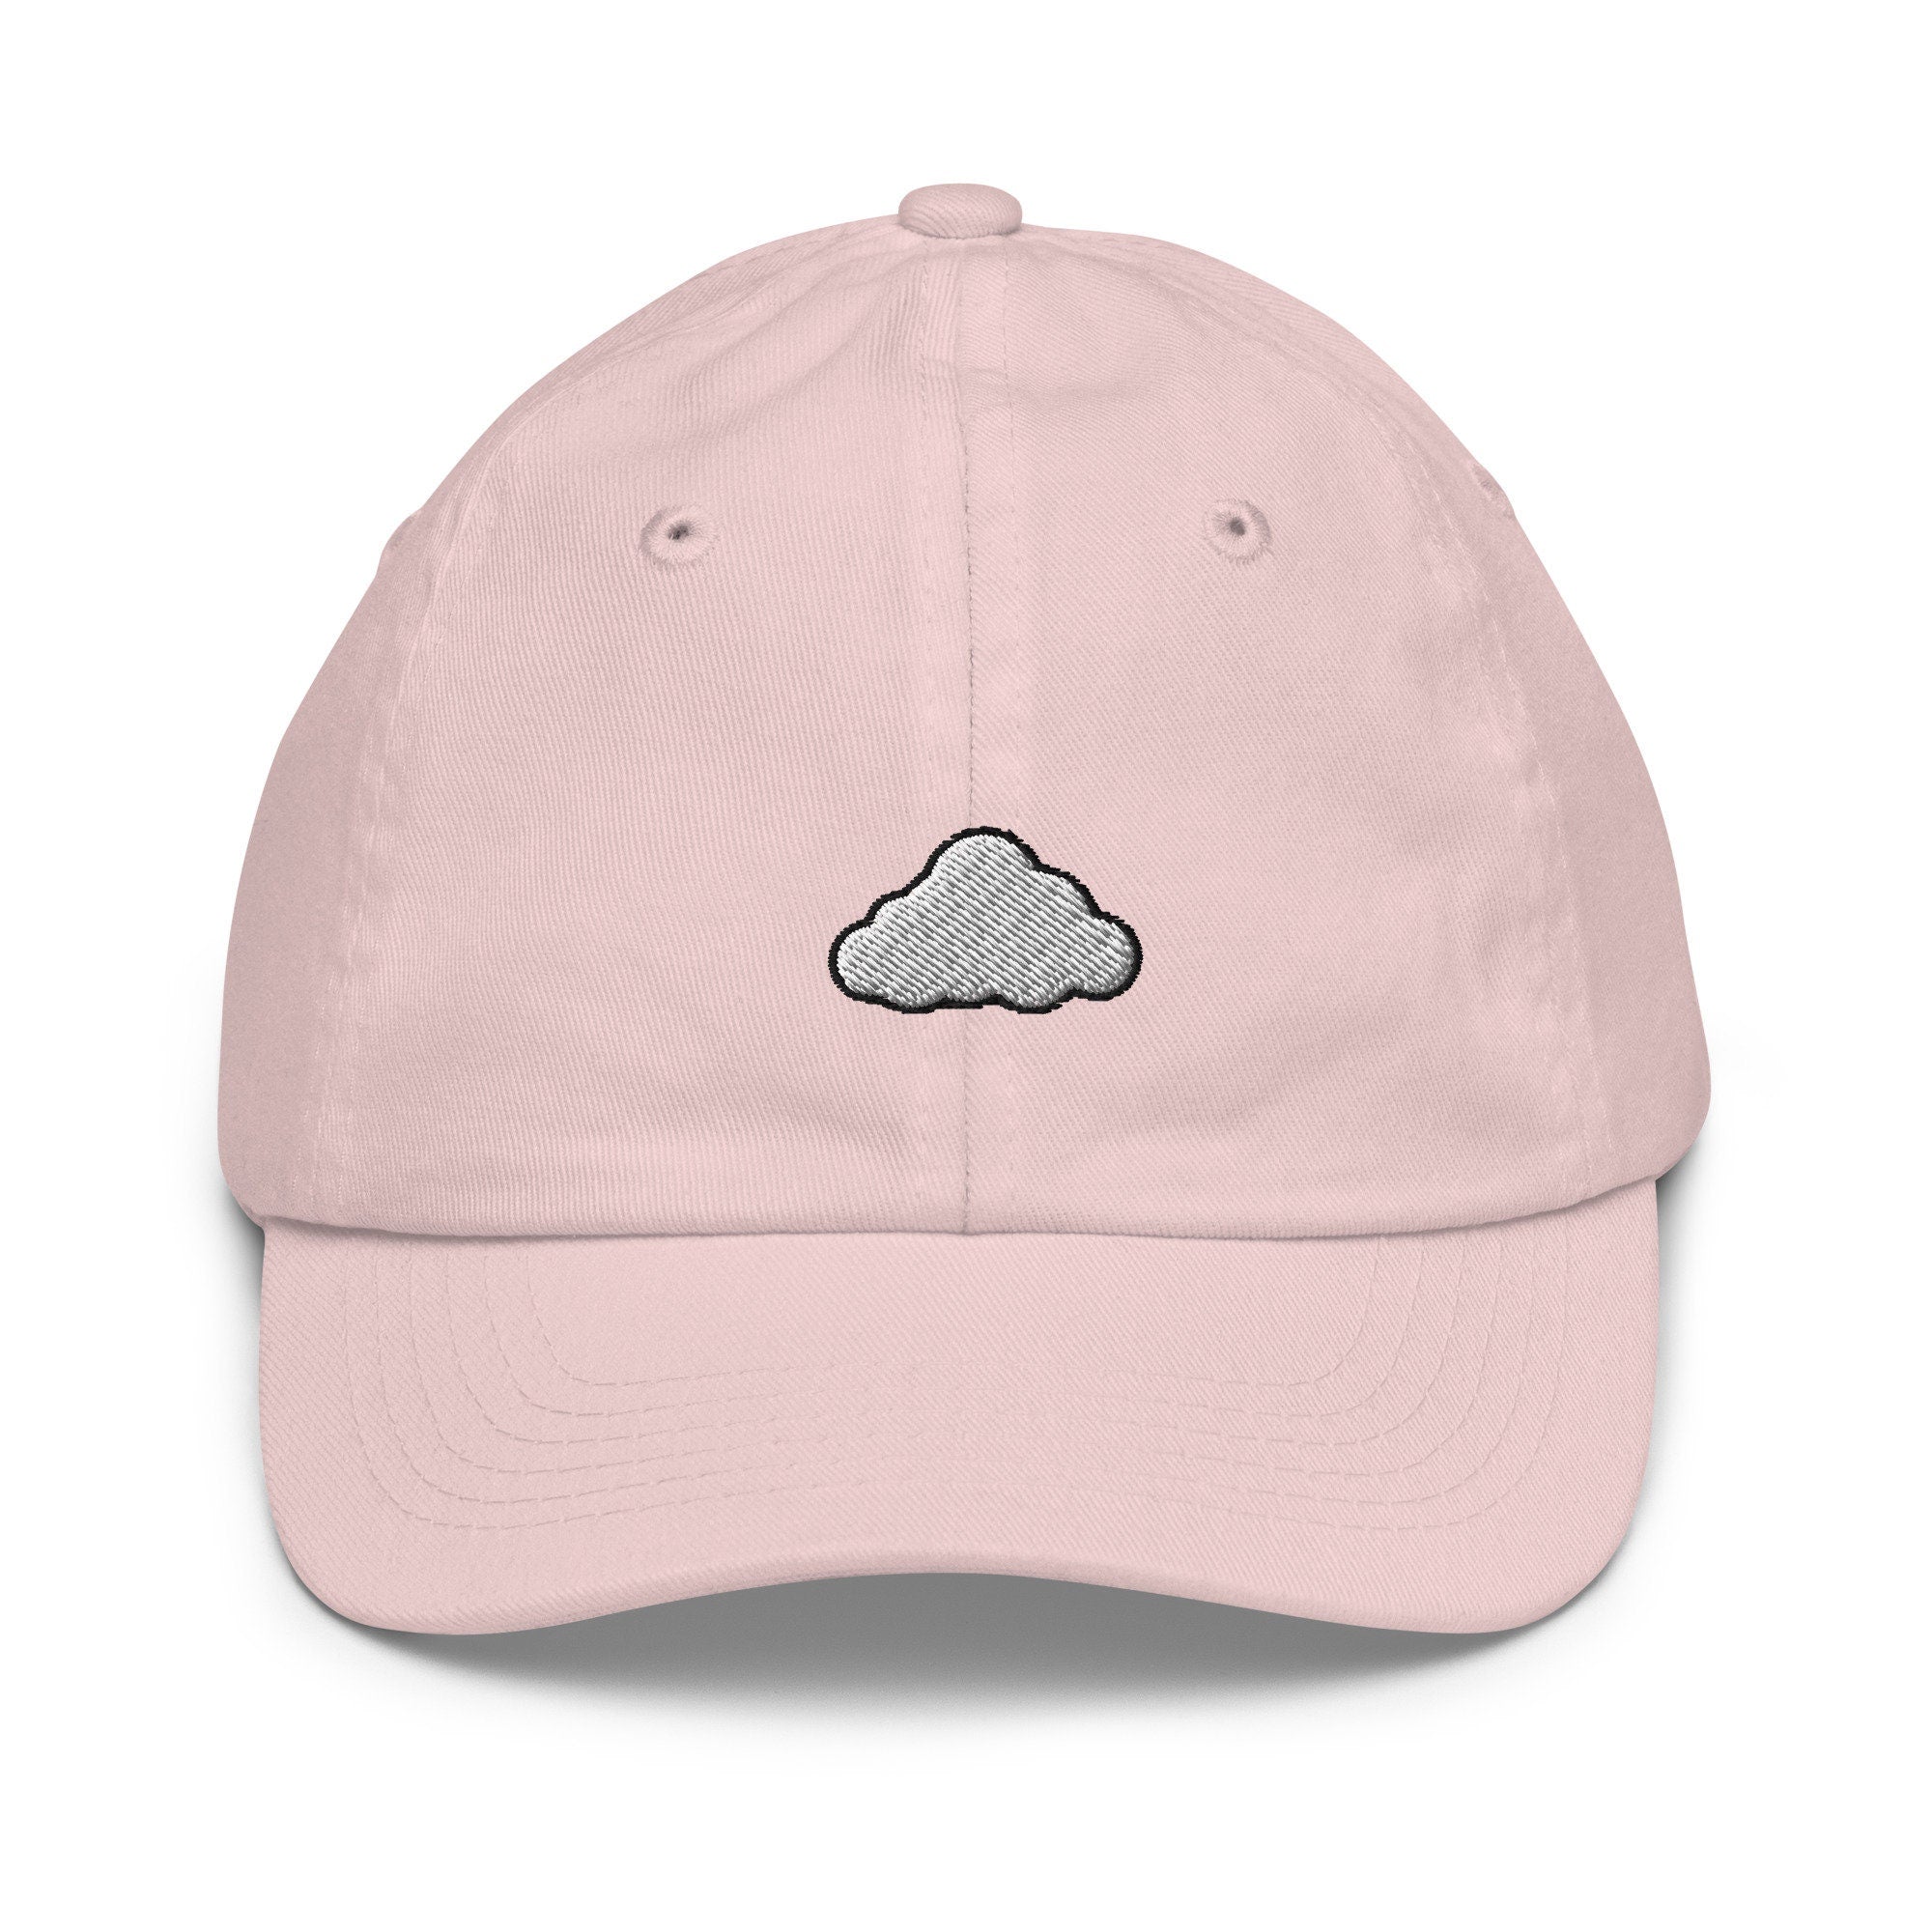 Kids Cloud Youth Baseball Cap, Embroidered Kids Hat, Childrens Hat Gift - Multiple Colors